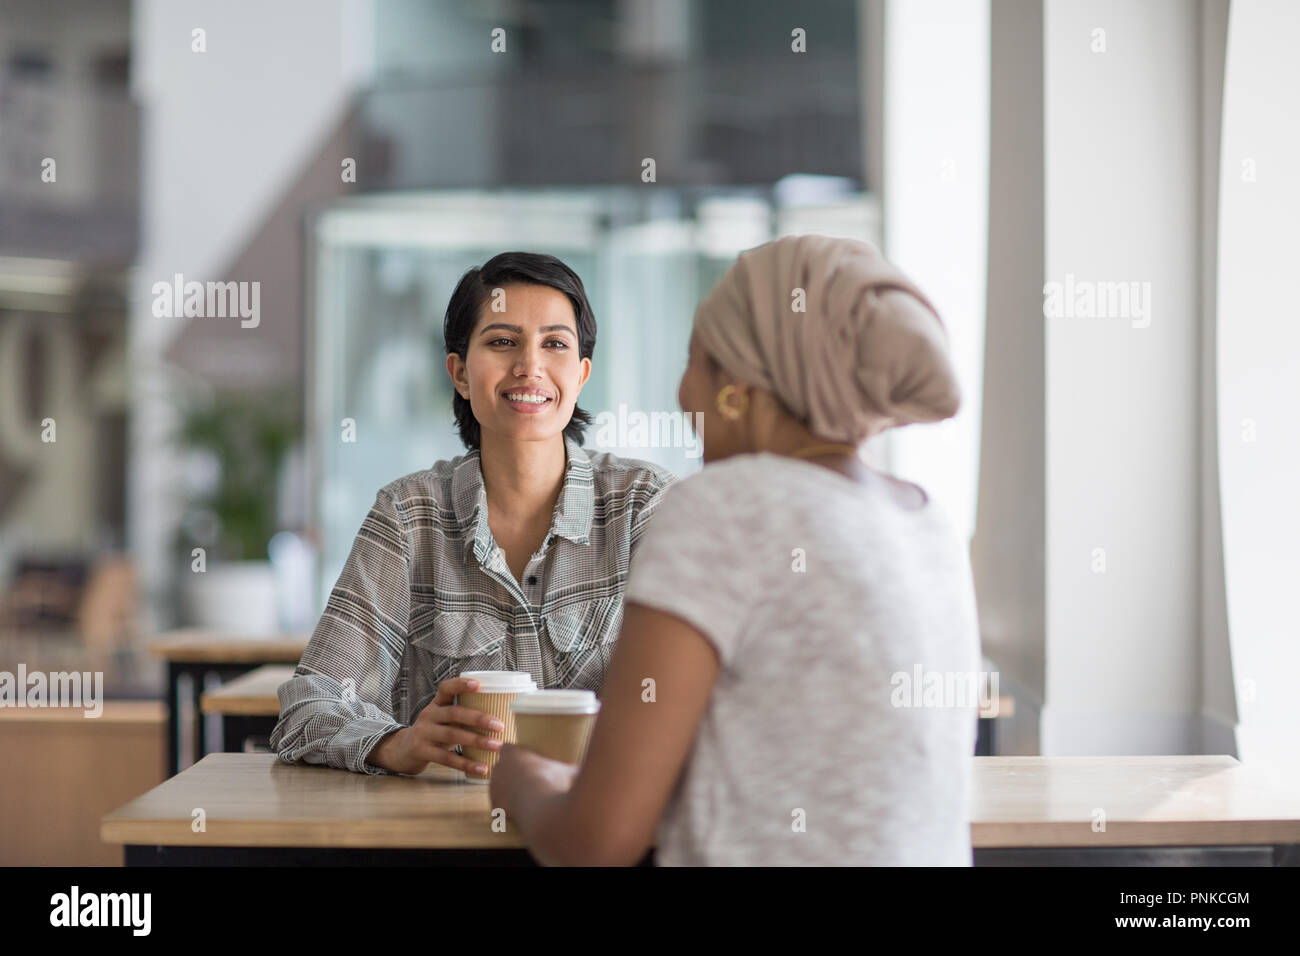 Female Muslim co-workers having coffee together Stock Photo